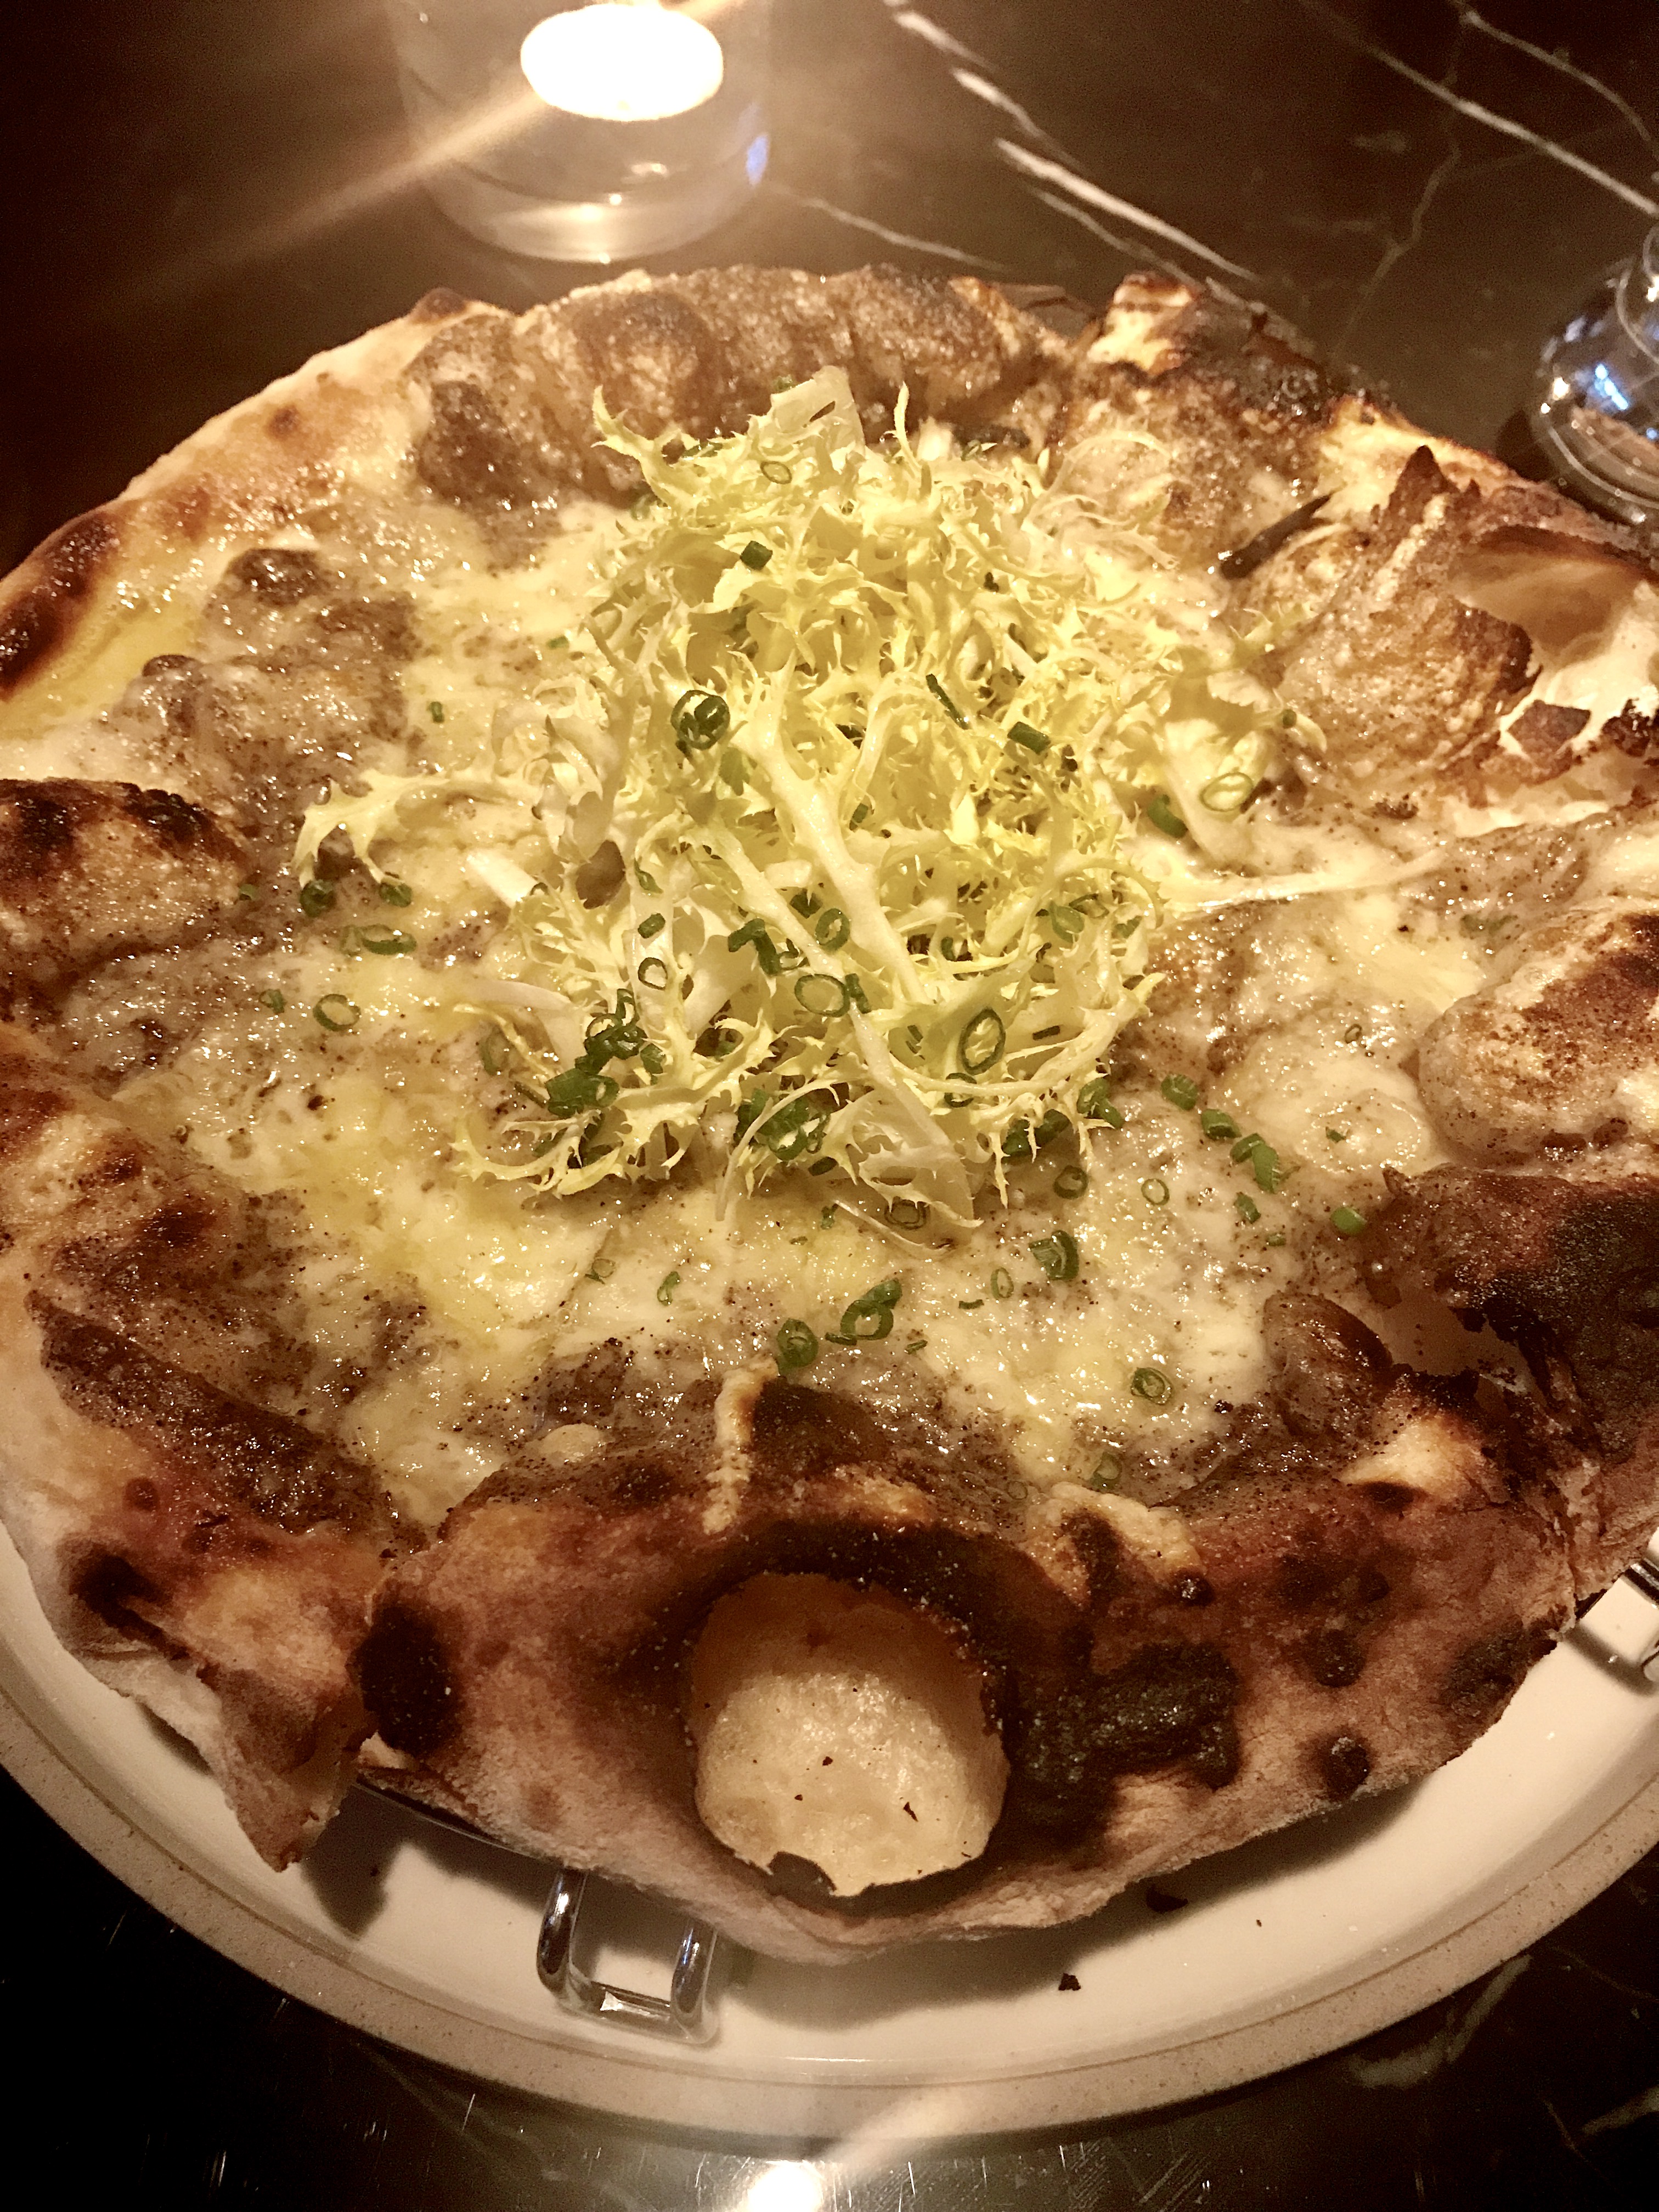 Truffle pizza at The Connaught hotel